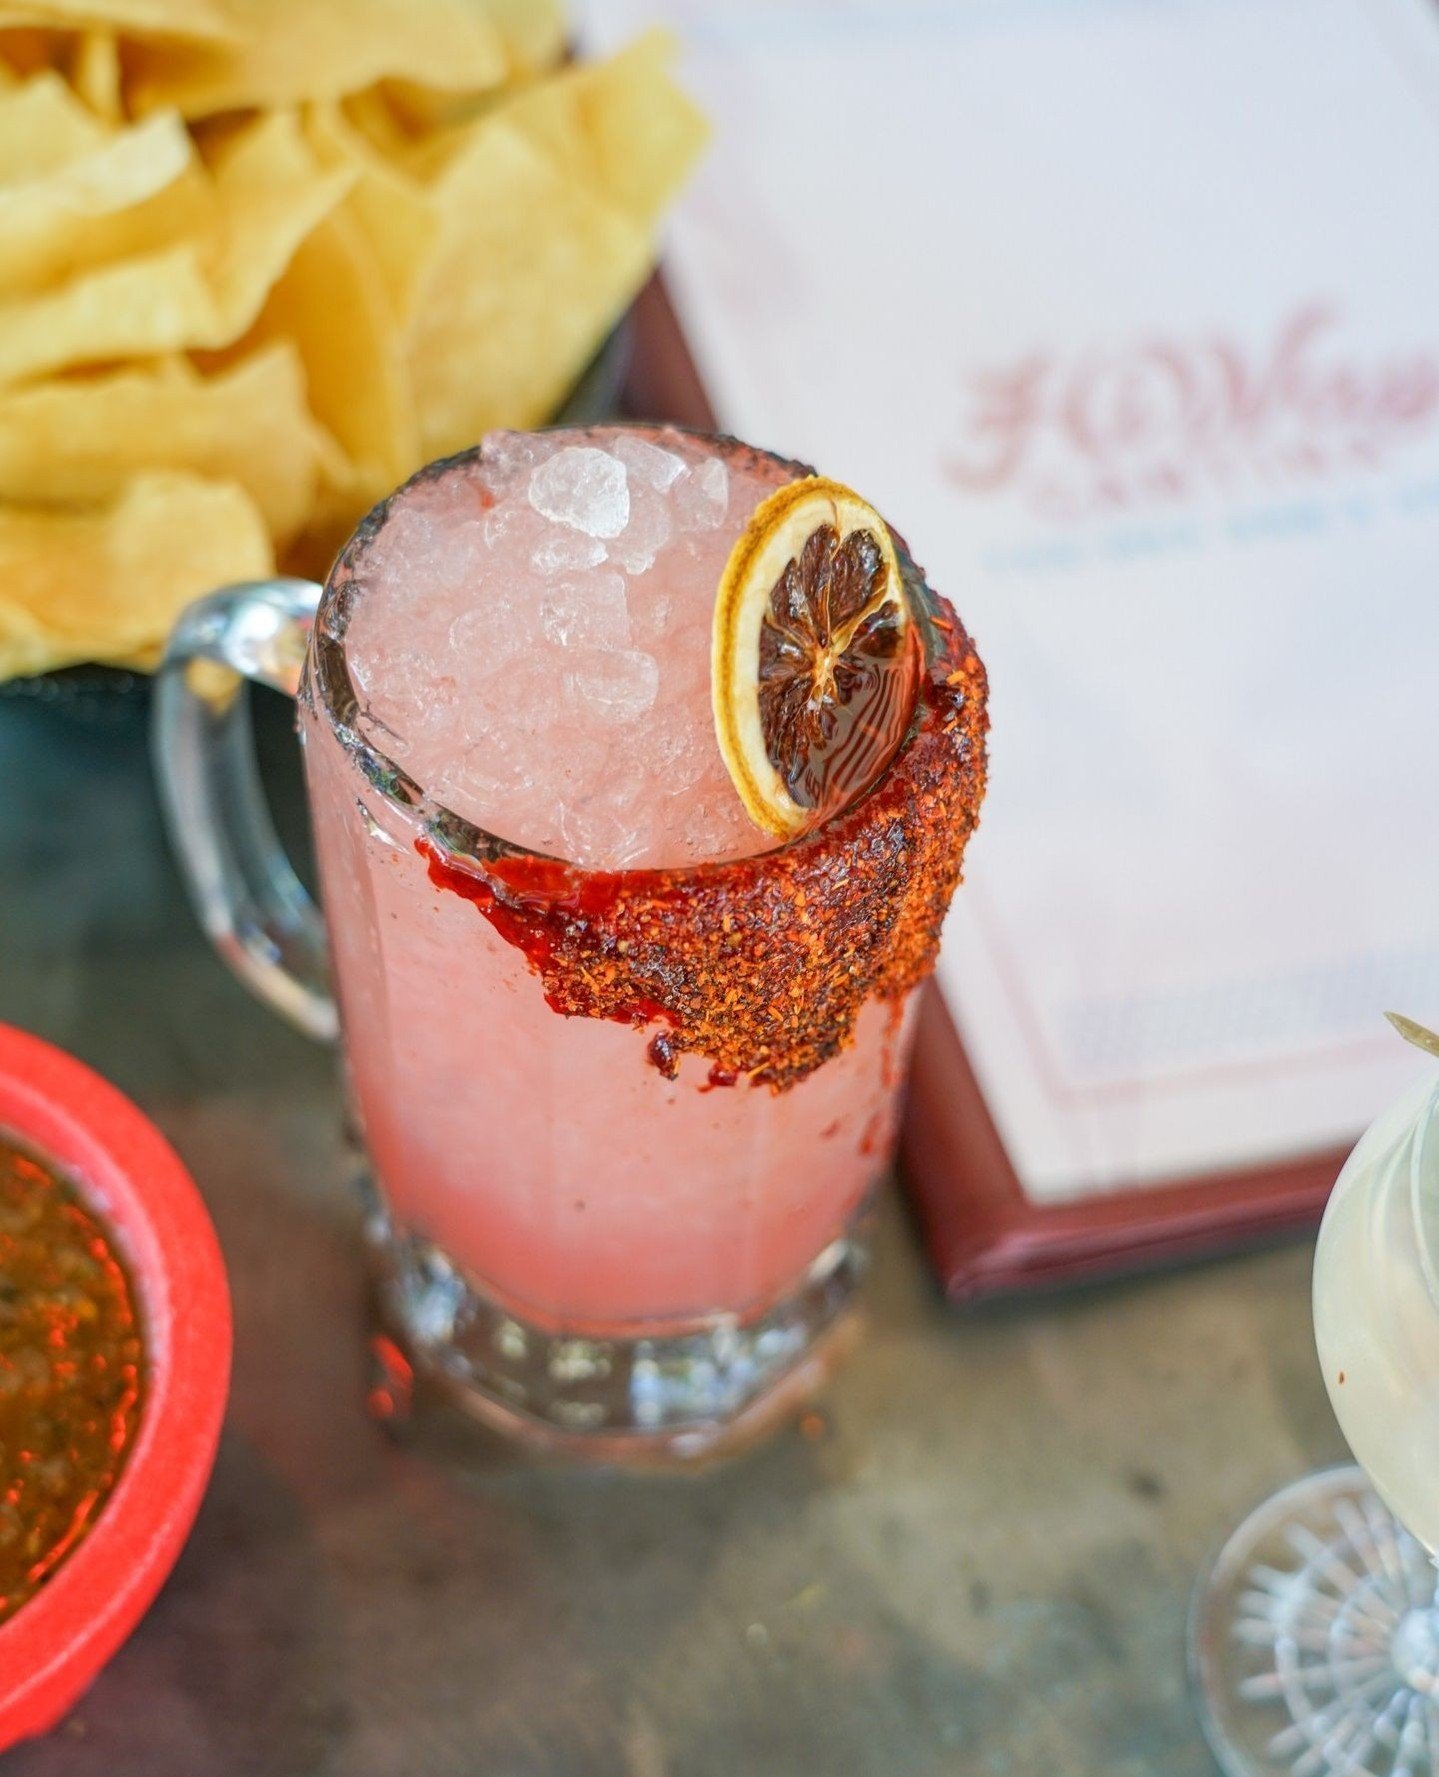 It's refreshing, it's vibrant, it's the Watermelon Mezcal Margarita made up of @mezcalamaras, @marfaspiritco orange liqueur, fresh lime, watermelon, hibiscus and @tajinusa. Sip on this and round out your weekend with #HiWayCantina.